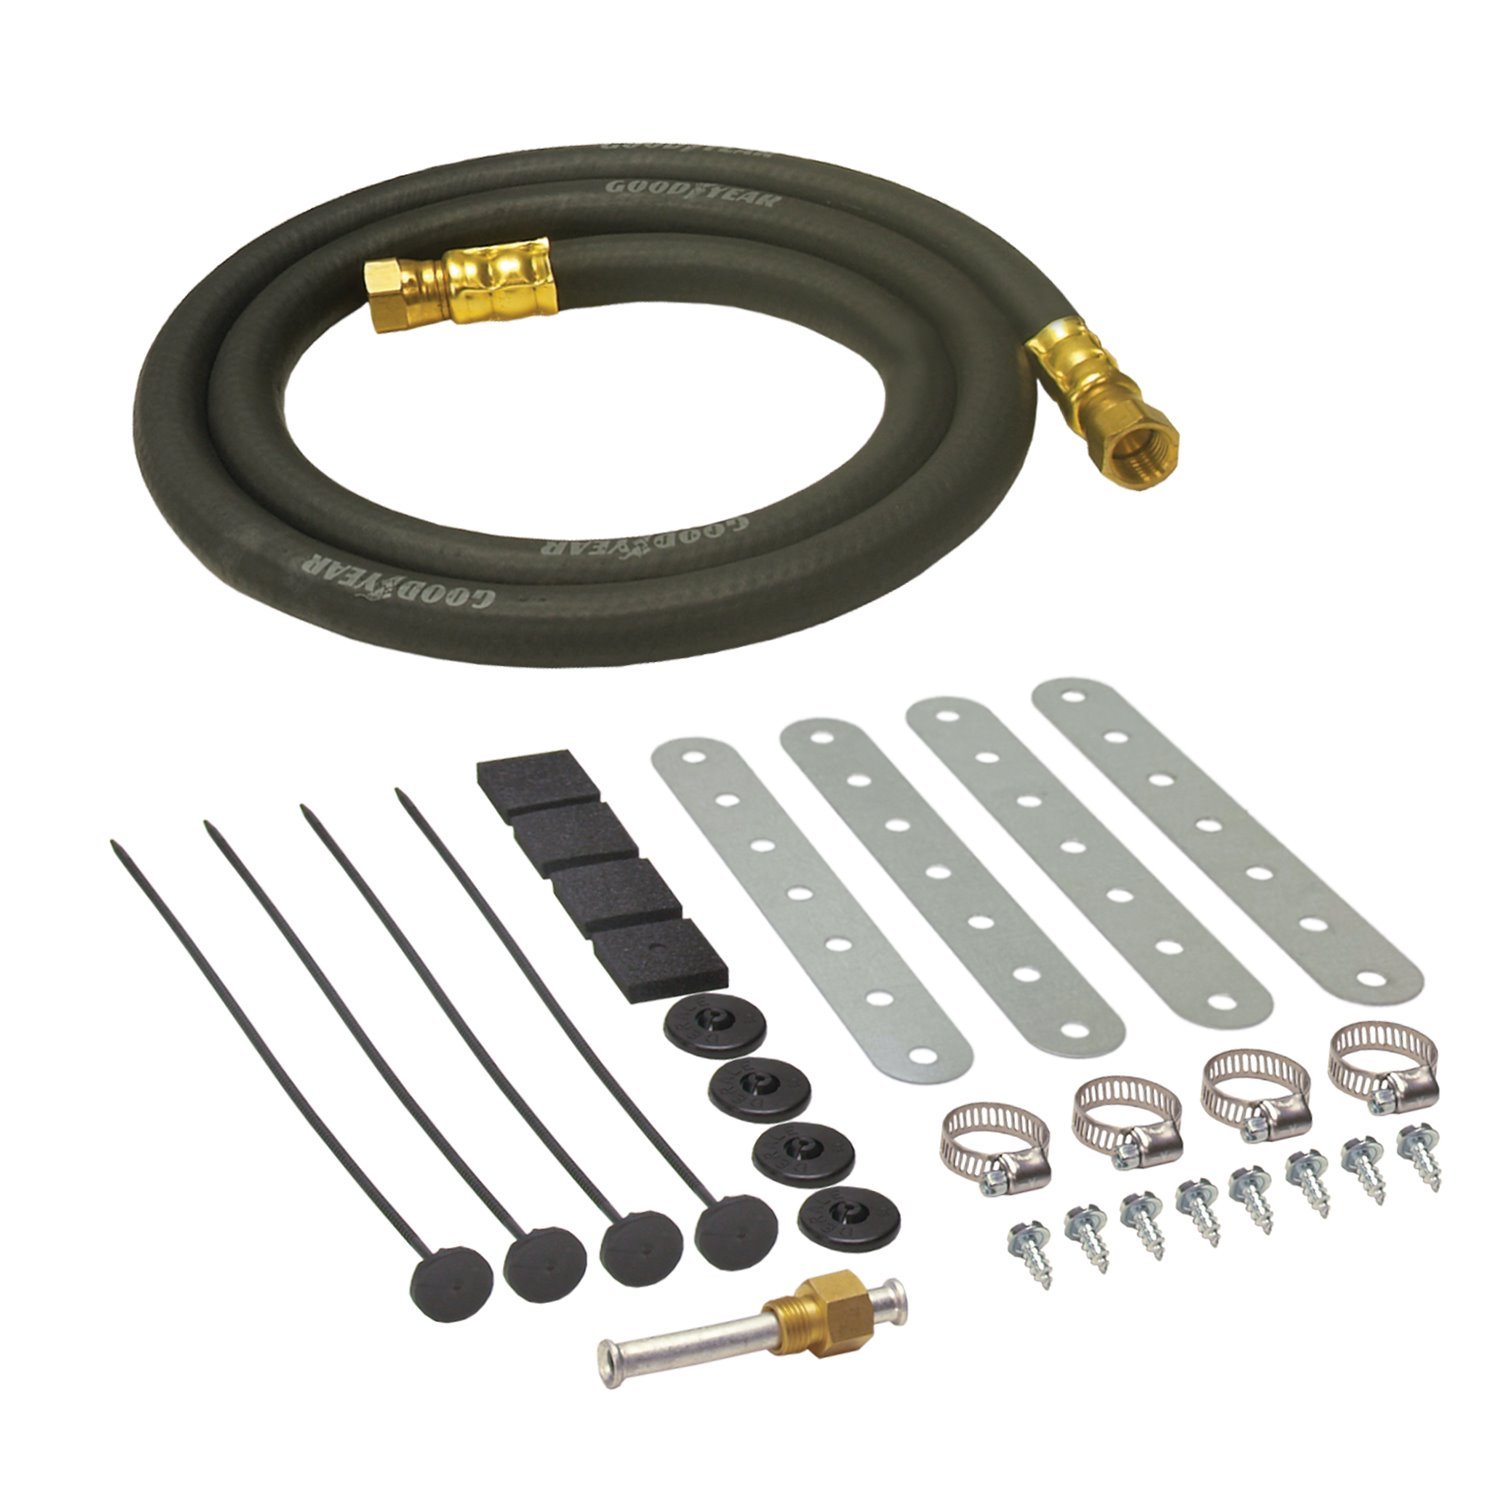 Deluxe Oil Cooler Installation Kit Plastic Rod and Rigid Mount Kits